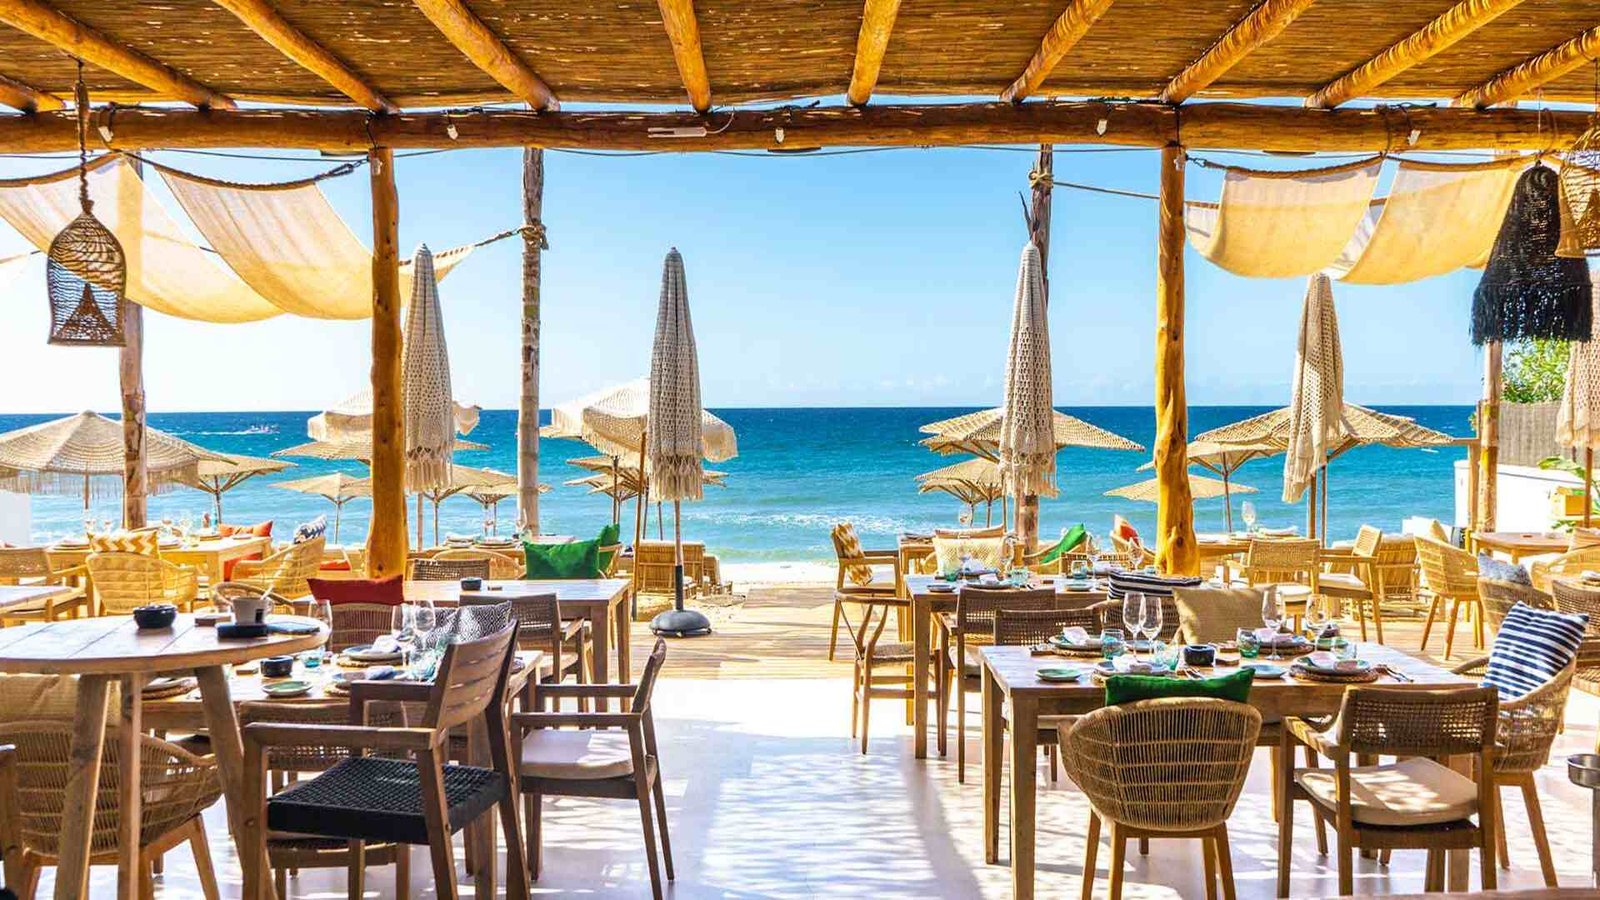 Top 10 Beach Clubs in Marbella - Discover the Best Spots to Relax and Party! - 120329127 3530357823681956 3270645763761247845 n 1 - Tourism -